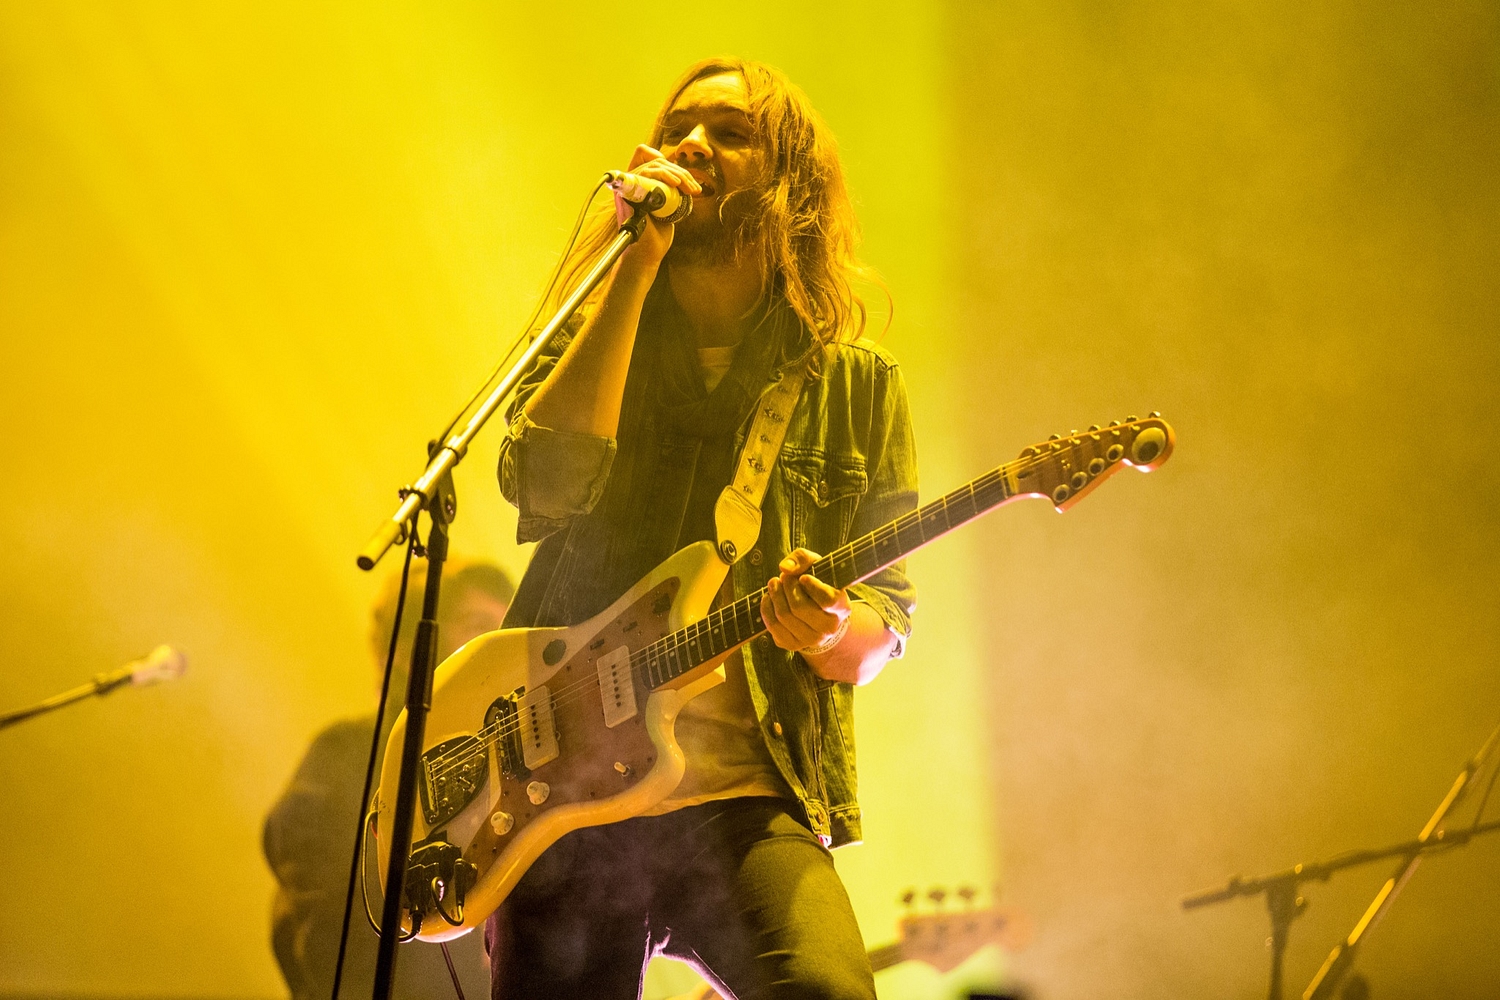 Watch Lady Gaga join Tame Impala on stage at FYF Fest